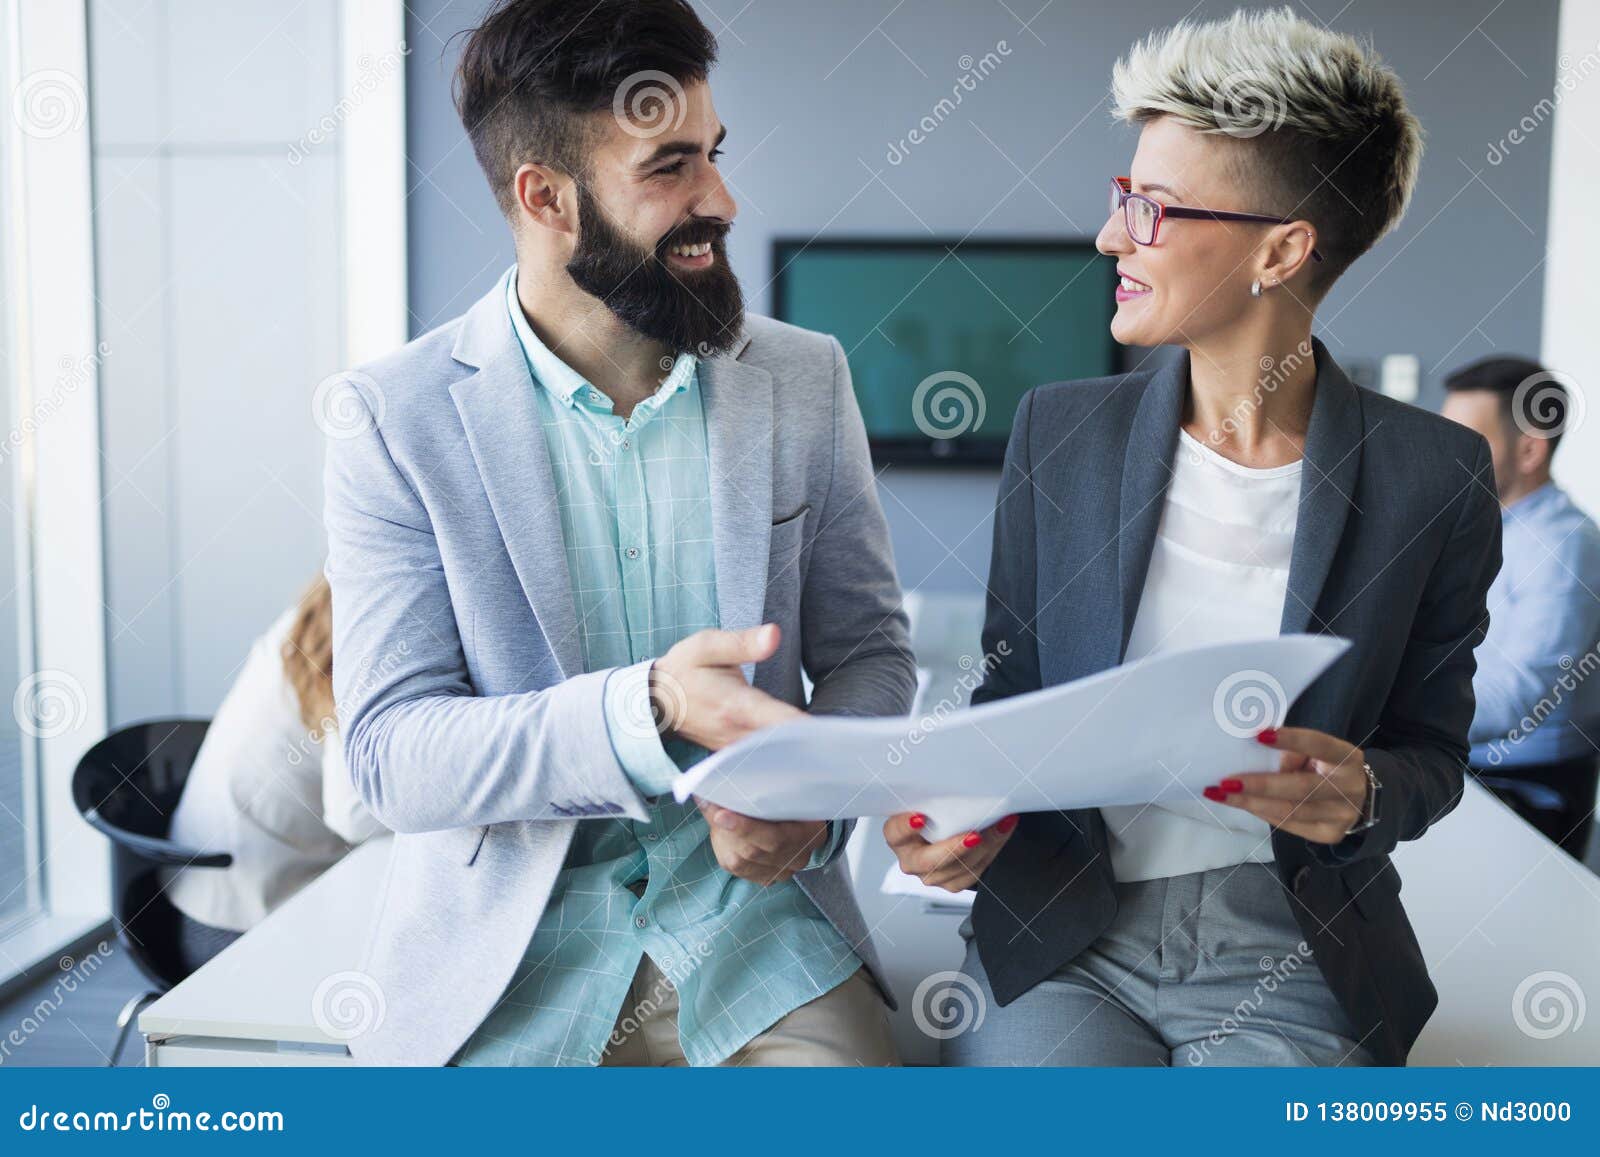 picture of handsome man and woman as business partners